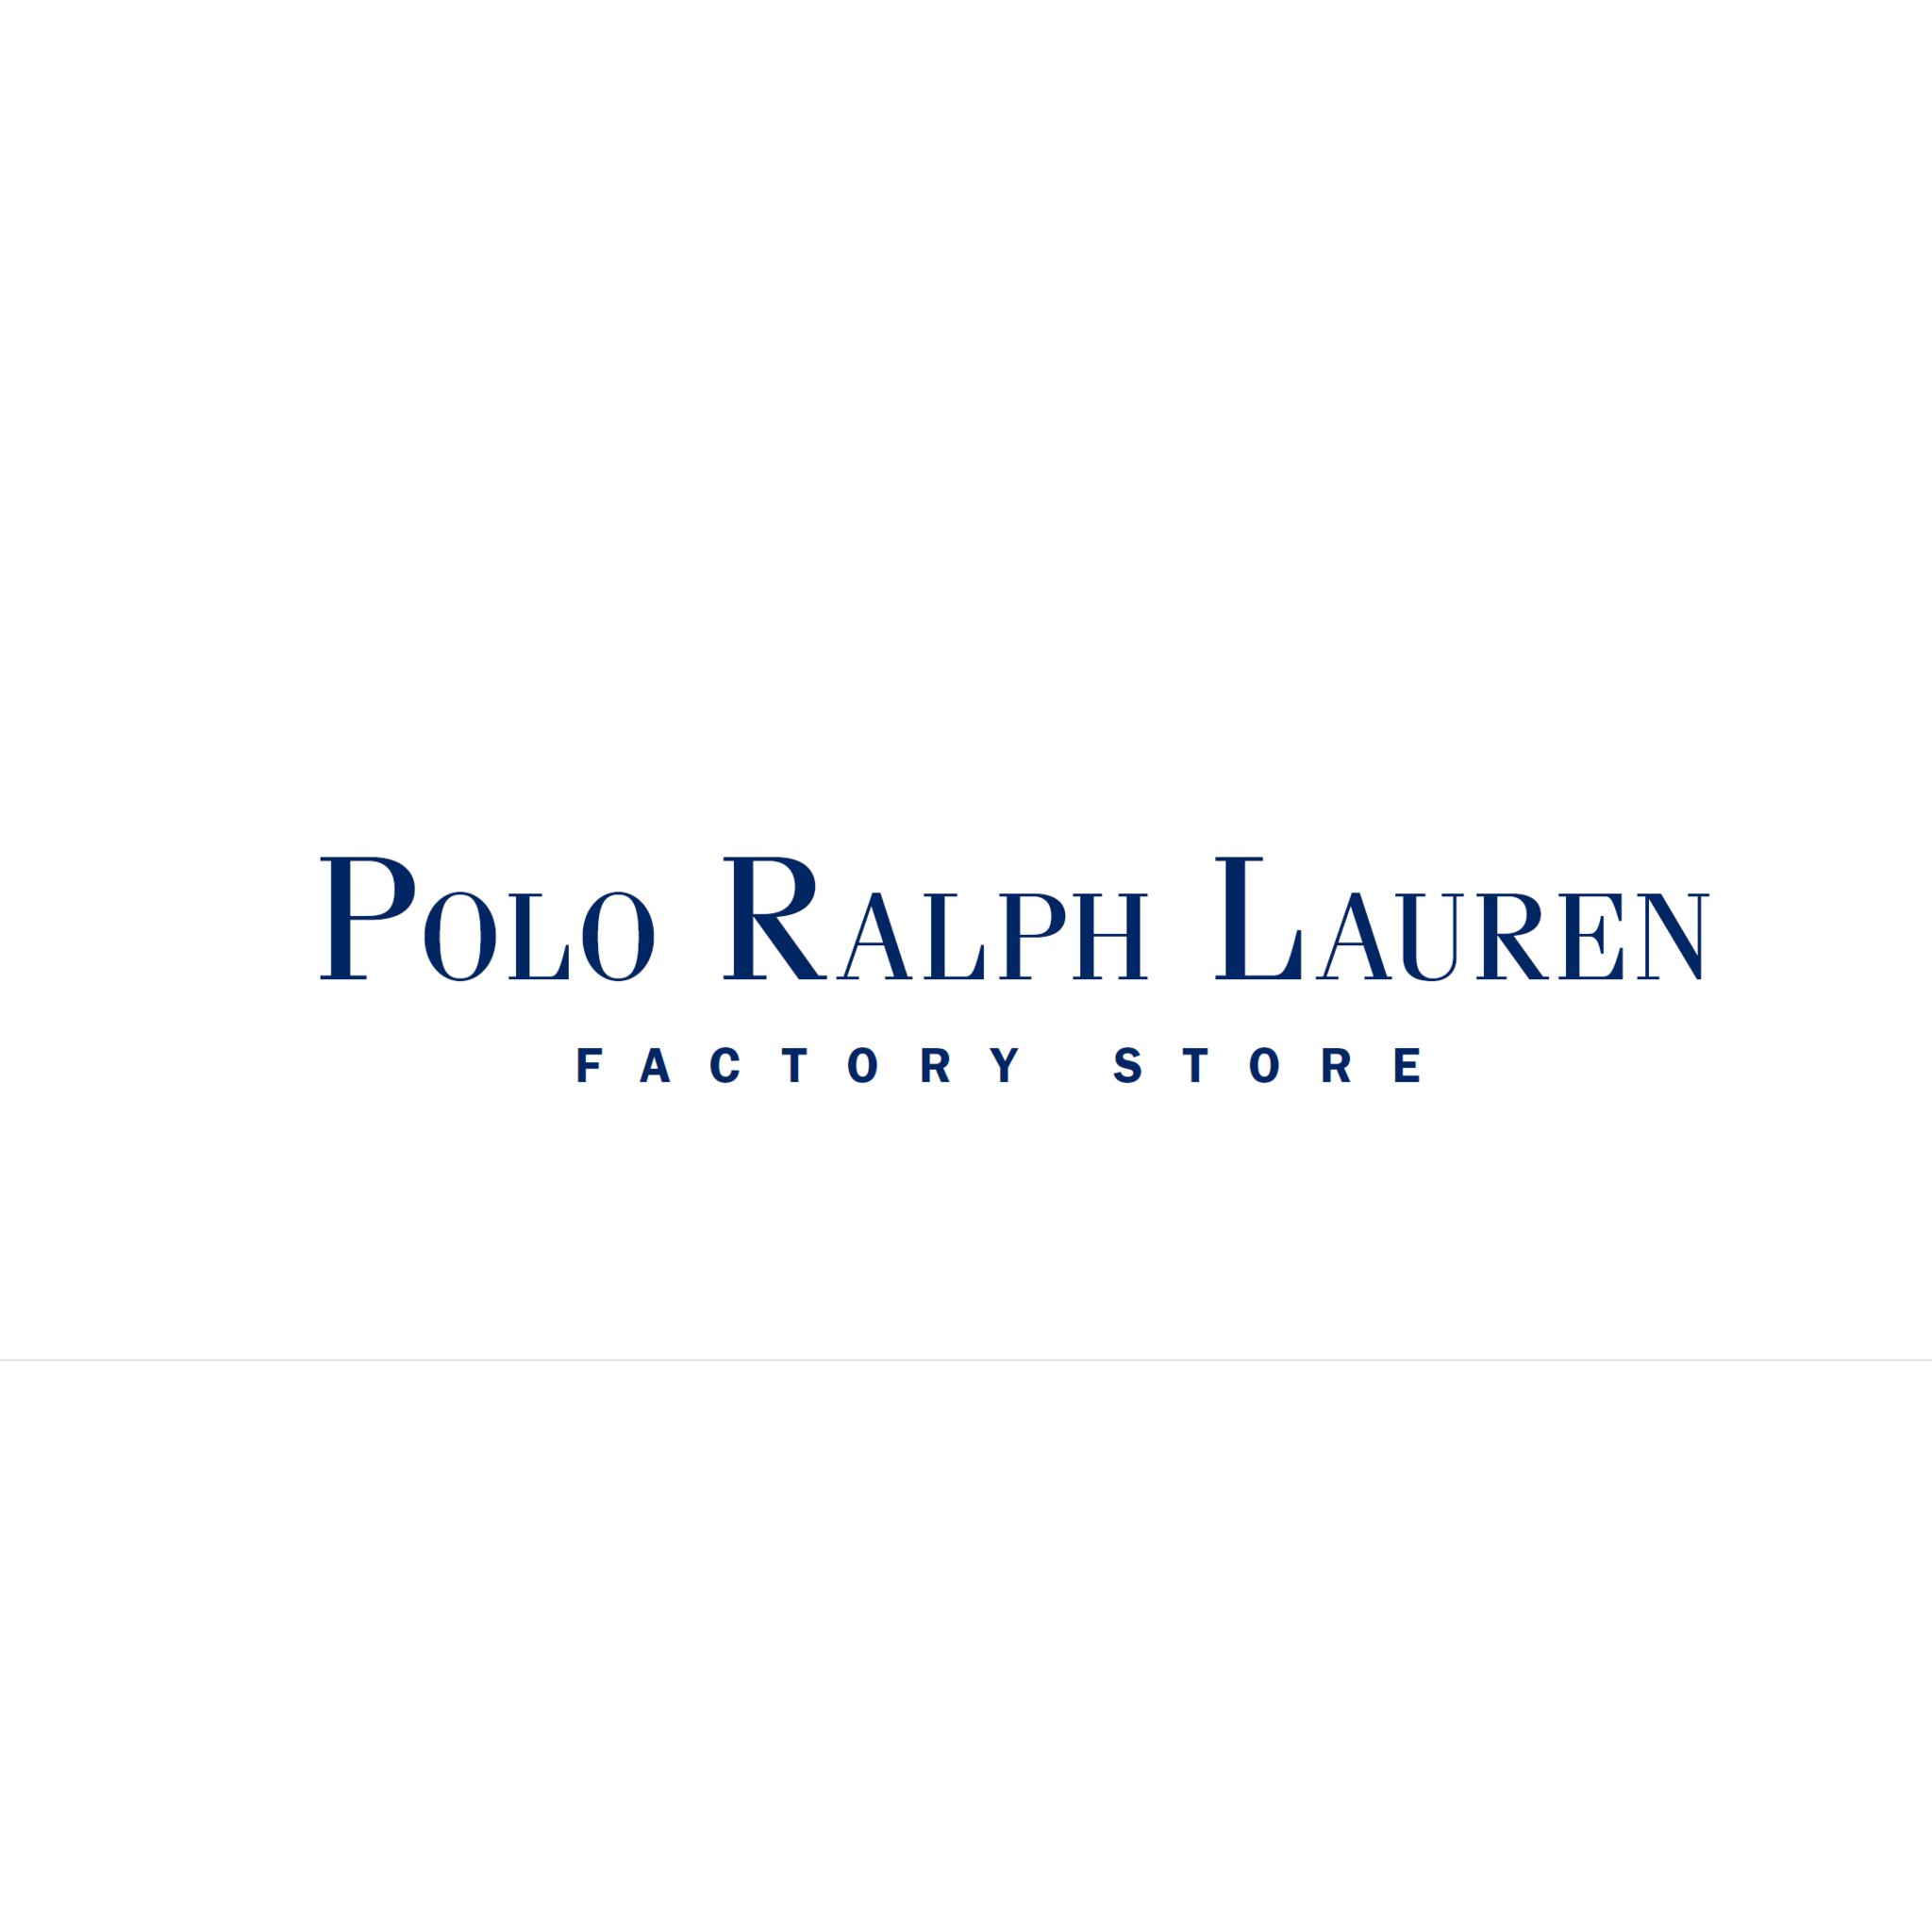 Polo Ralph Lauren Children's Factory Store - Clothing Manufacturers & Wholesalers